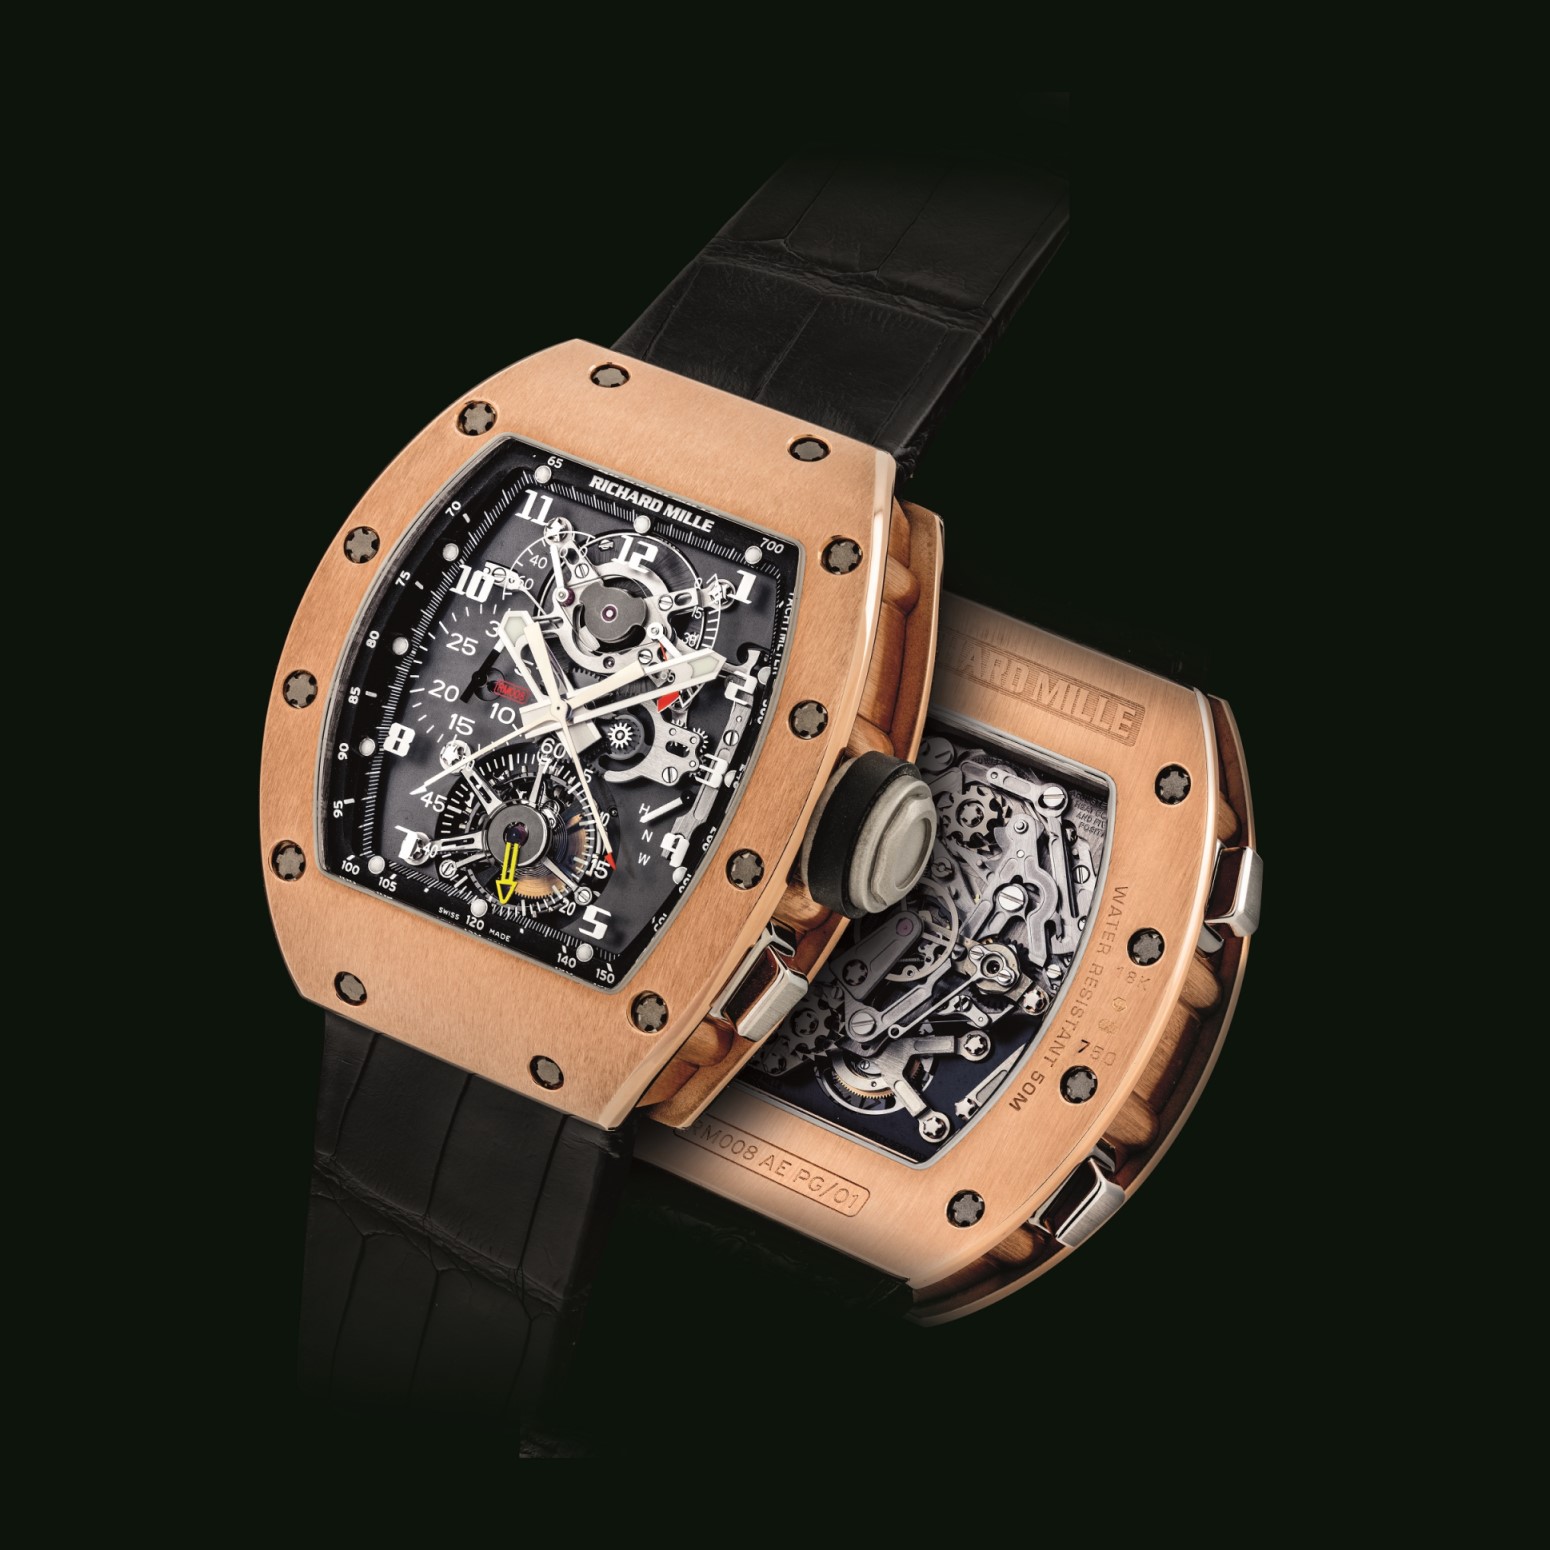 A watch by Richard Mille, a Swiss watchmaking brand